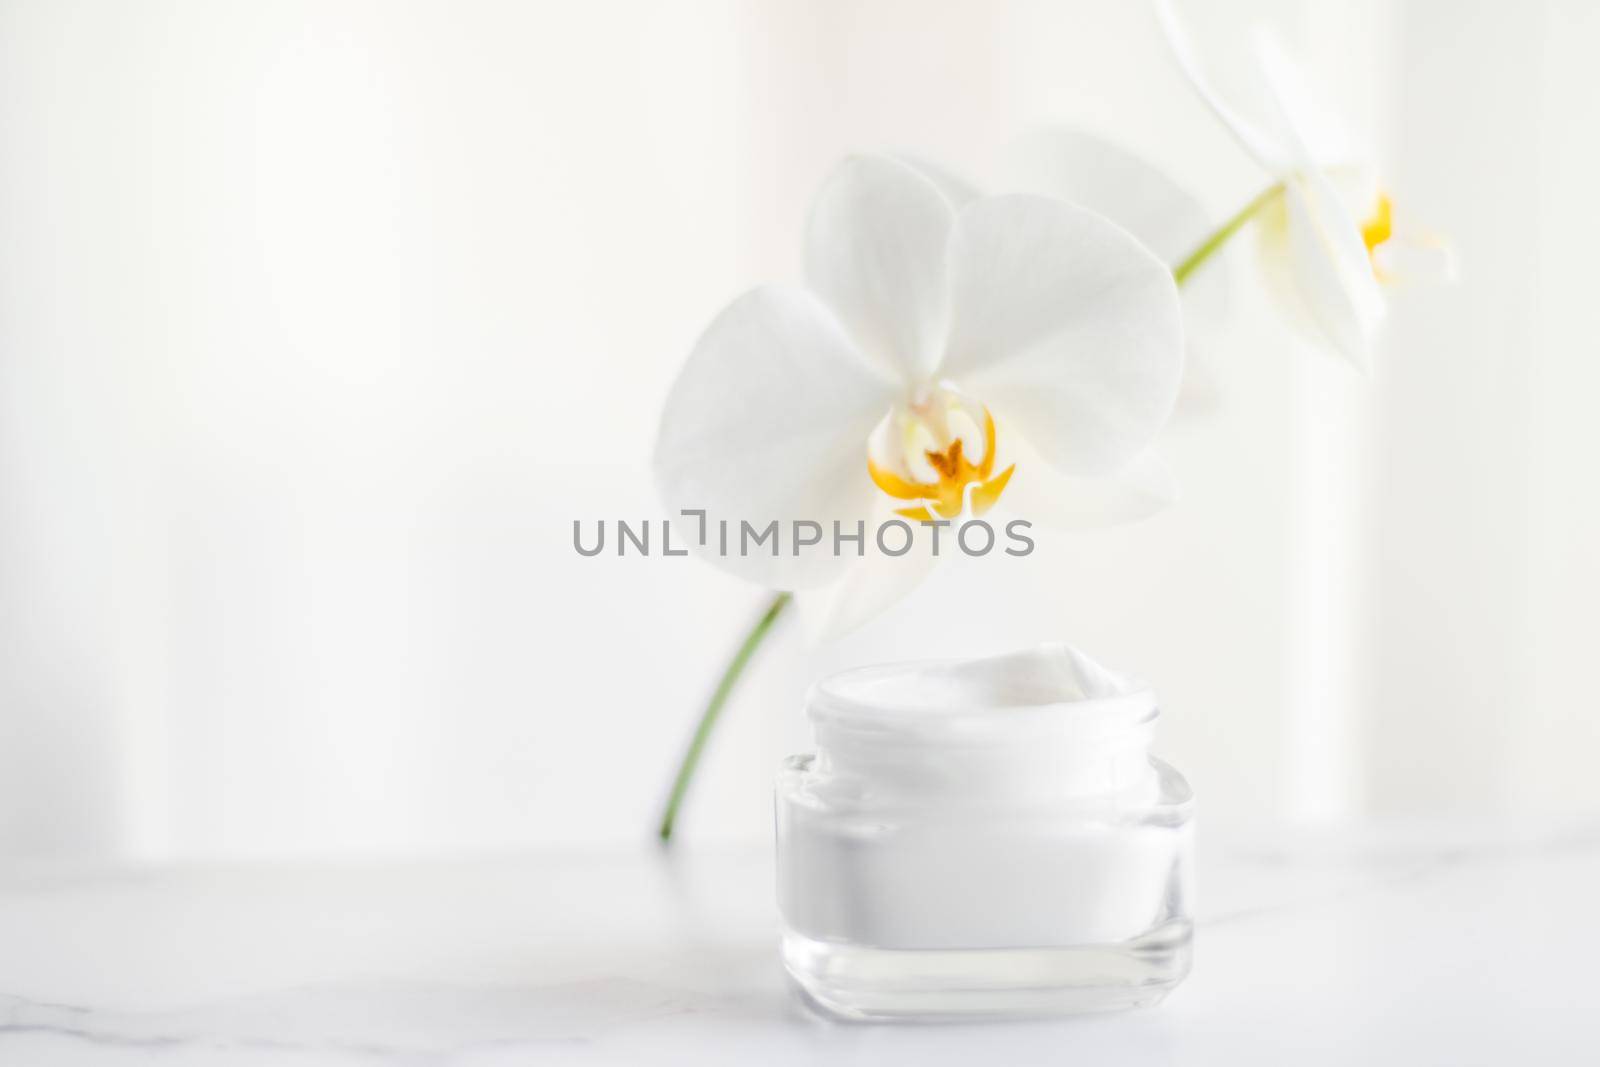 Cosmetic branding, toiletries and spf concept - Face cream moisturizer jar and orchid flower, moisturizing skin care lotion and lifting emulsion, anti-age cosmetics for luxury beauty skincare brand